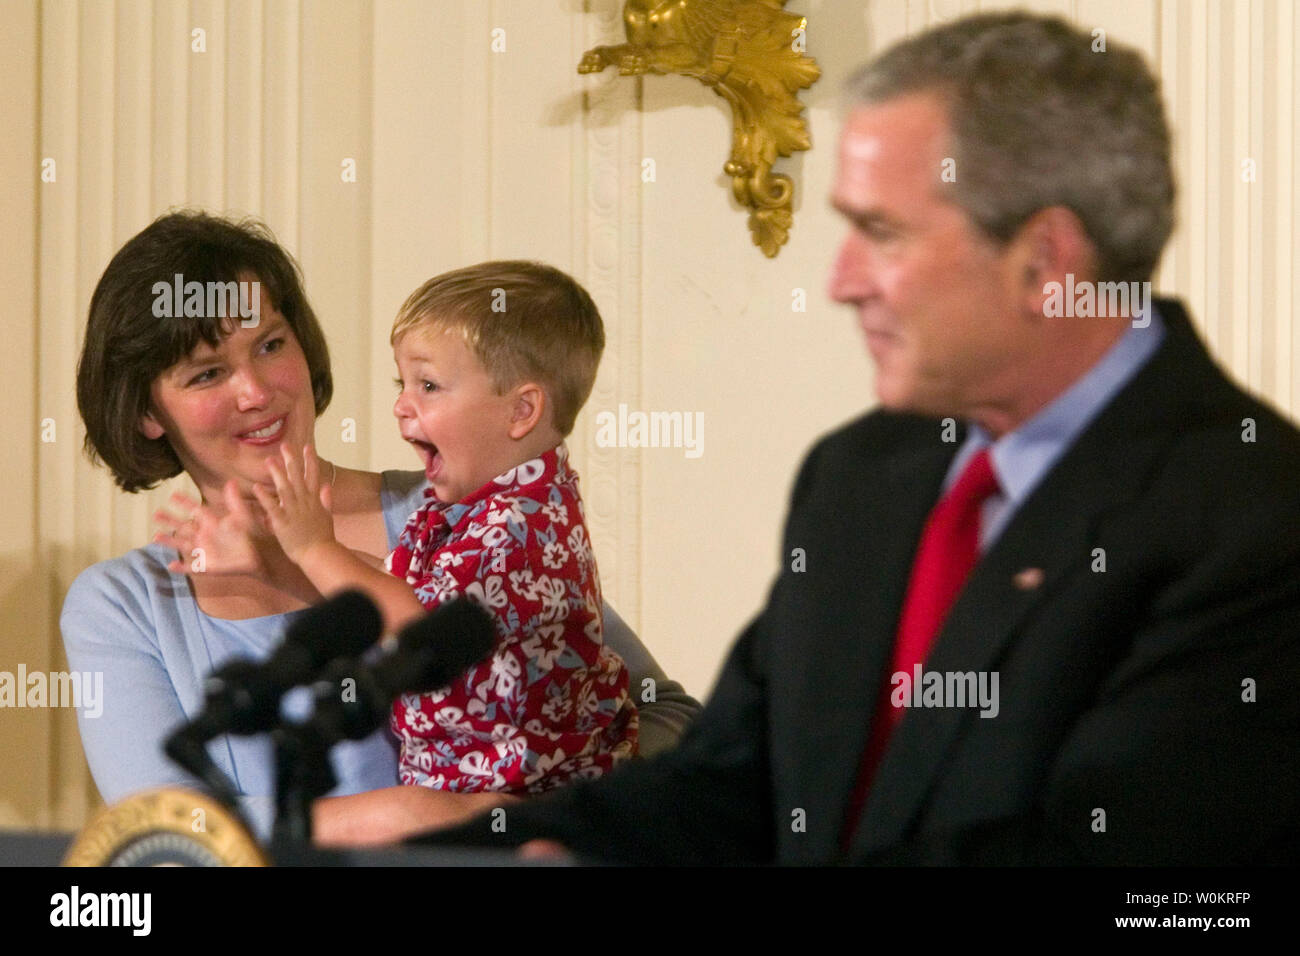 Courtney Atnip, left, holds her son Carter as President George W. Bush delivers a speech on bioethics in the East Room of the White House in Washington, mAY 24, 2005.  Twenty-one families adopted children from embryos appeared as guests. The White House is criticizing pending legislation that would loosen restrictions on government funding of embryonic stem cell research as a vote in the U.S. House of Representatives draws near. (UPI Photo/Kamenko Pajic) Stock Photo